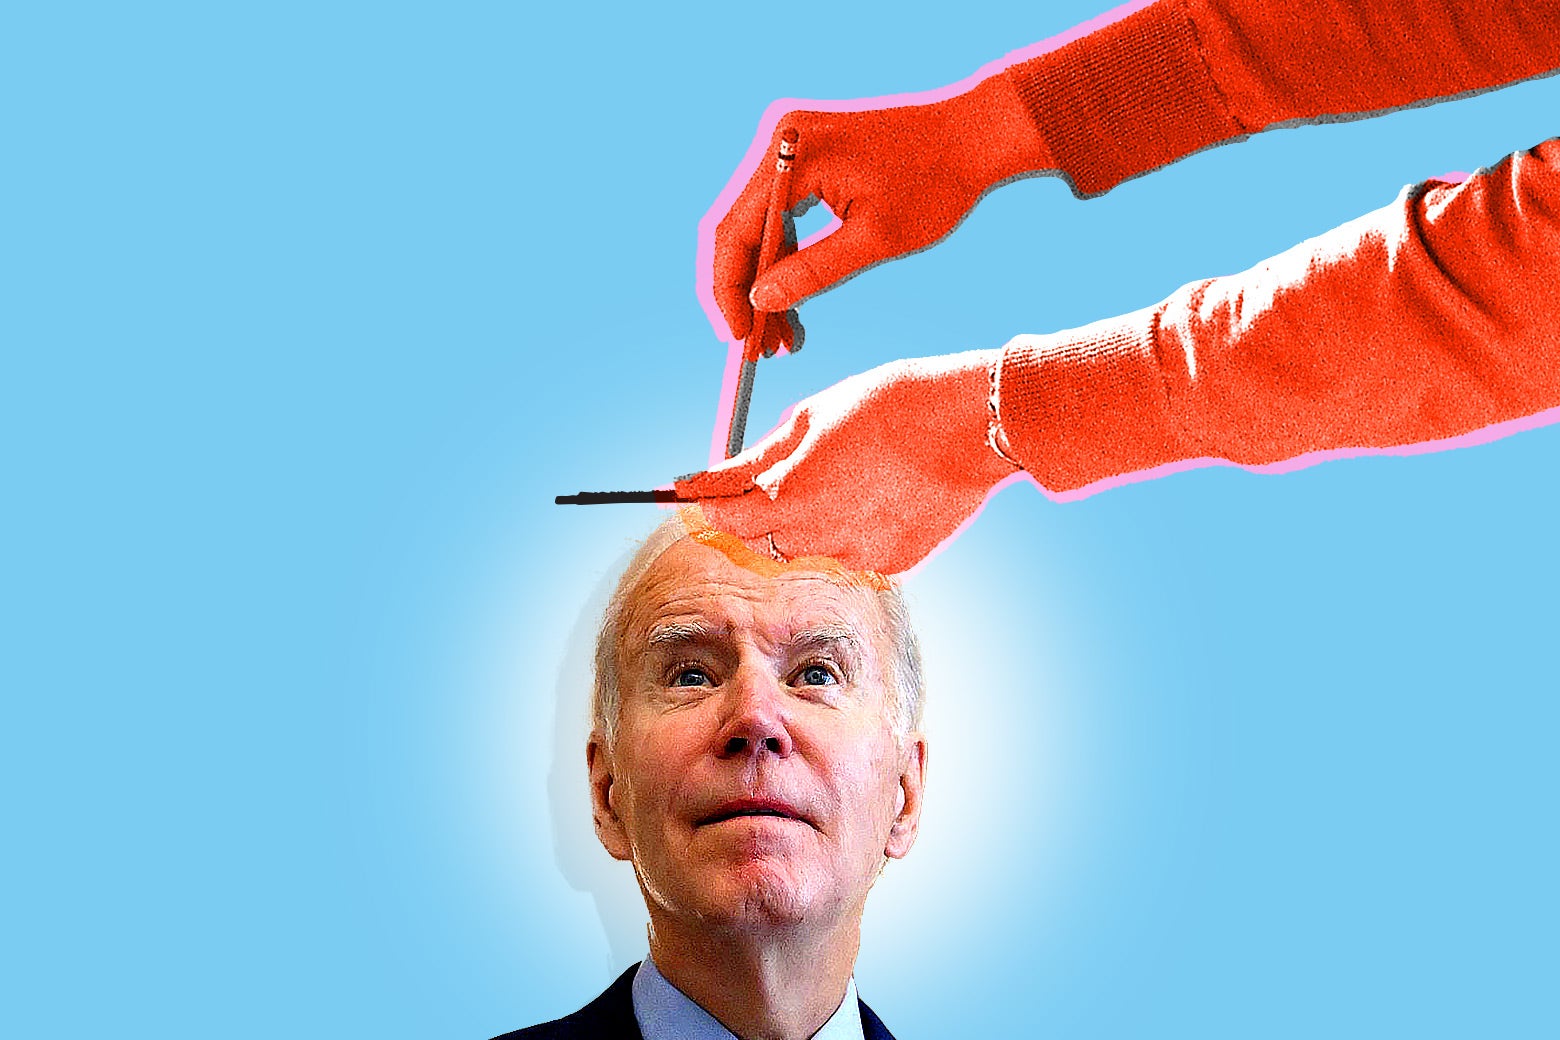 Biden stands against a blue background, while a hand superimposed on the image draws a line above his head, like he's a kid having his height measured. 